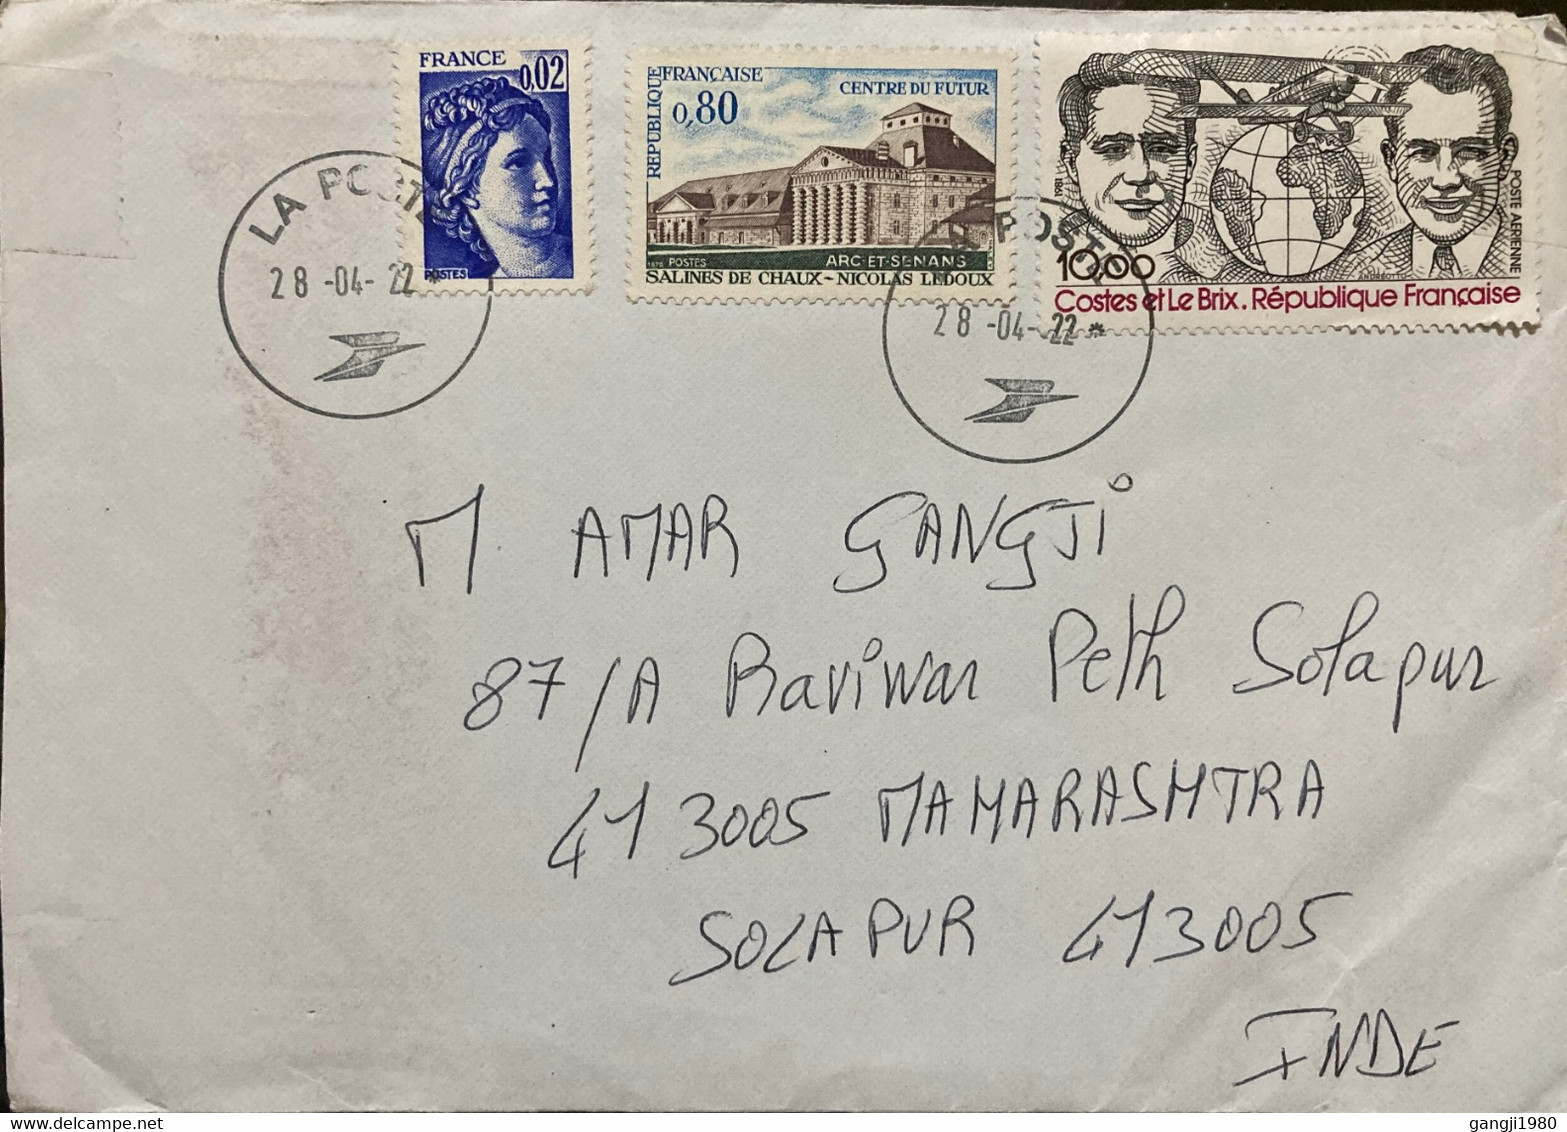 FRANCE 2022, QUEEN,AEROPLANE,GLOBE,BUILDING,ARCHITECTURE,3 STAMPS USED COVER TO INDIA - Lettres & Documents